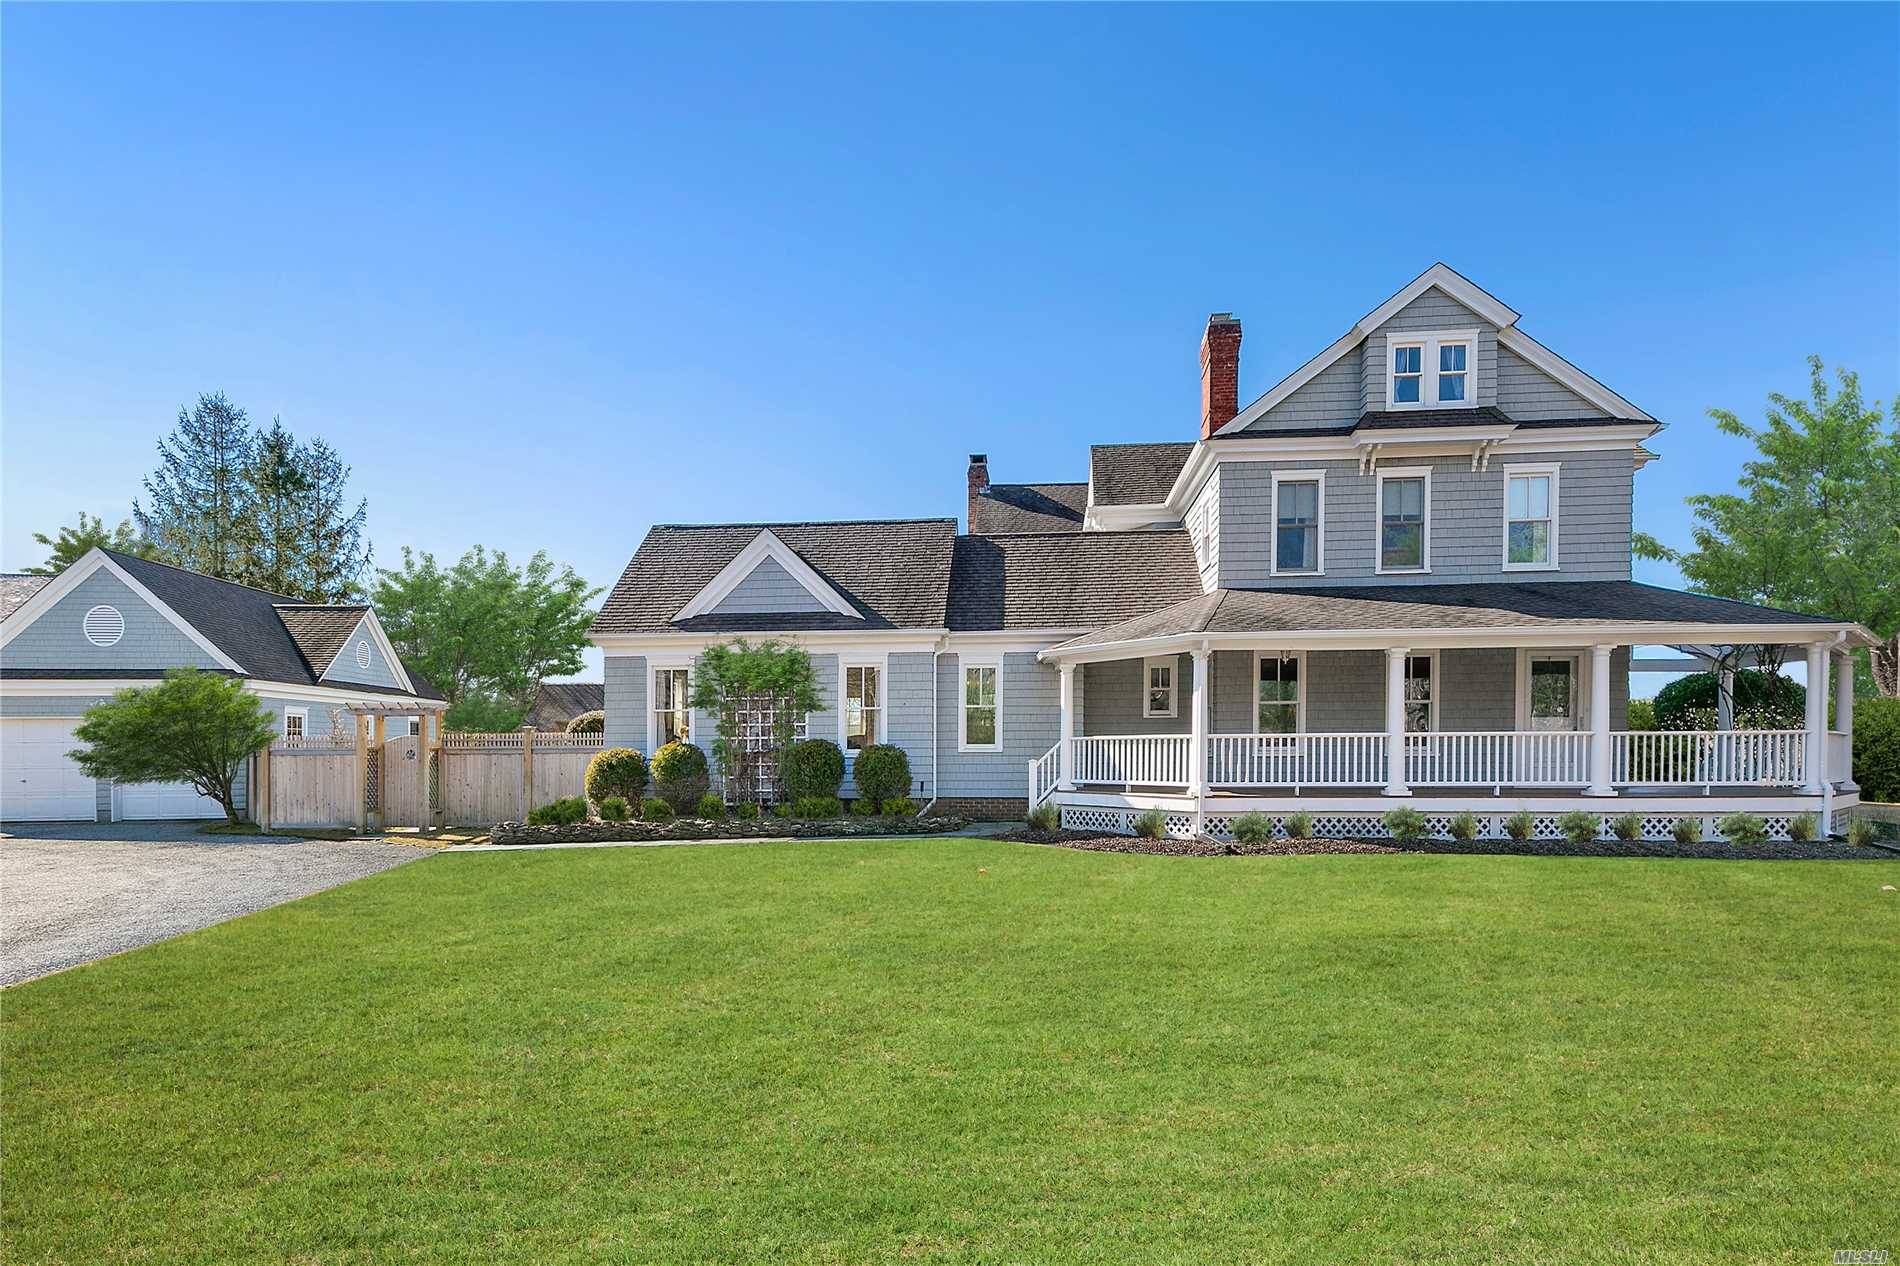 This magnificent three story traditional home is quintessential Quogue.